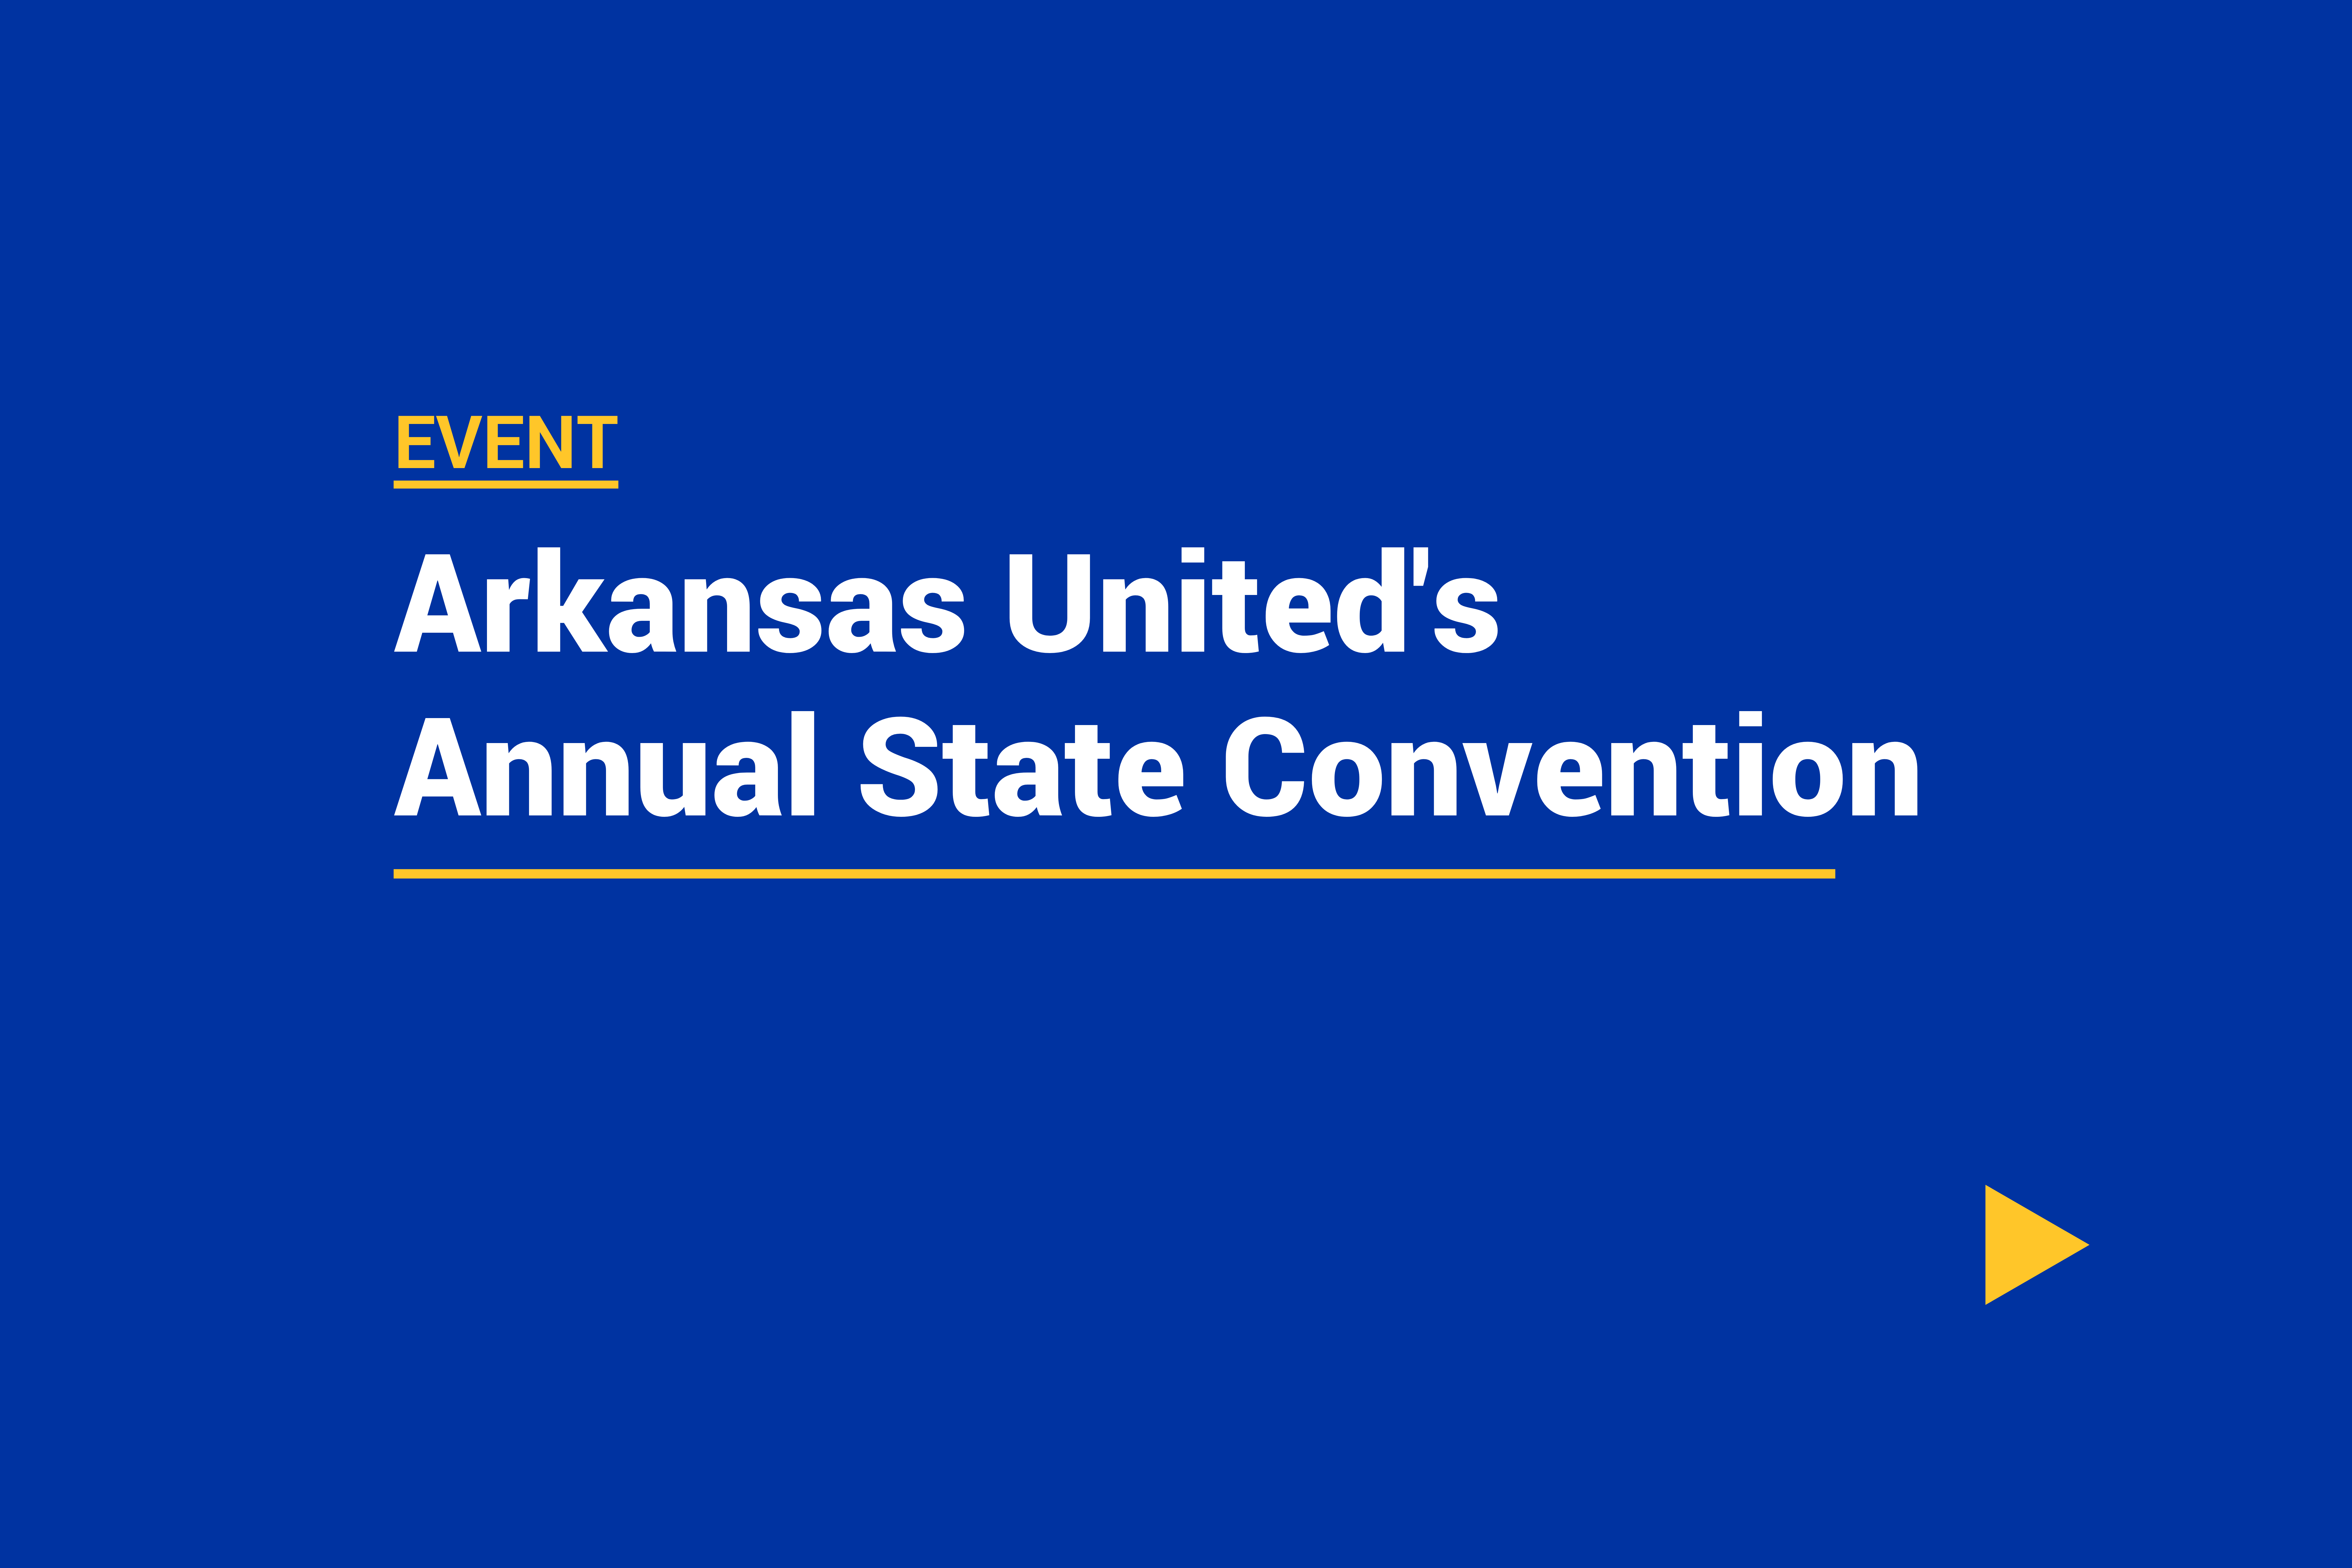 Arkansas United's Annual State Convention